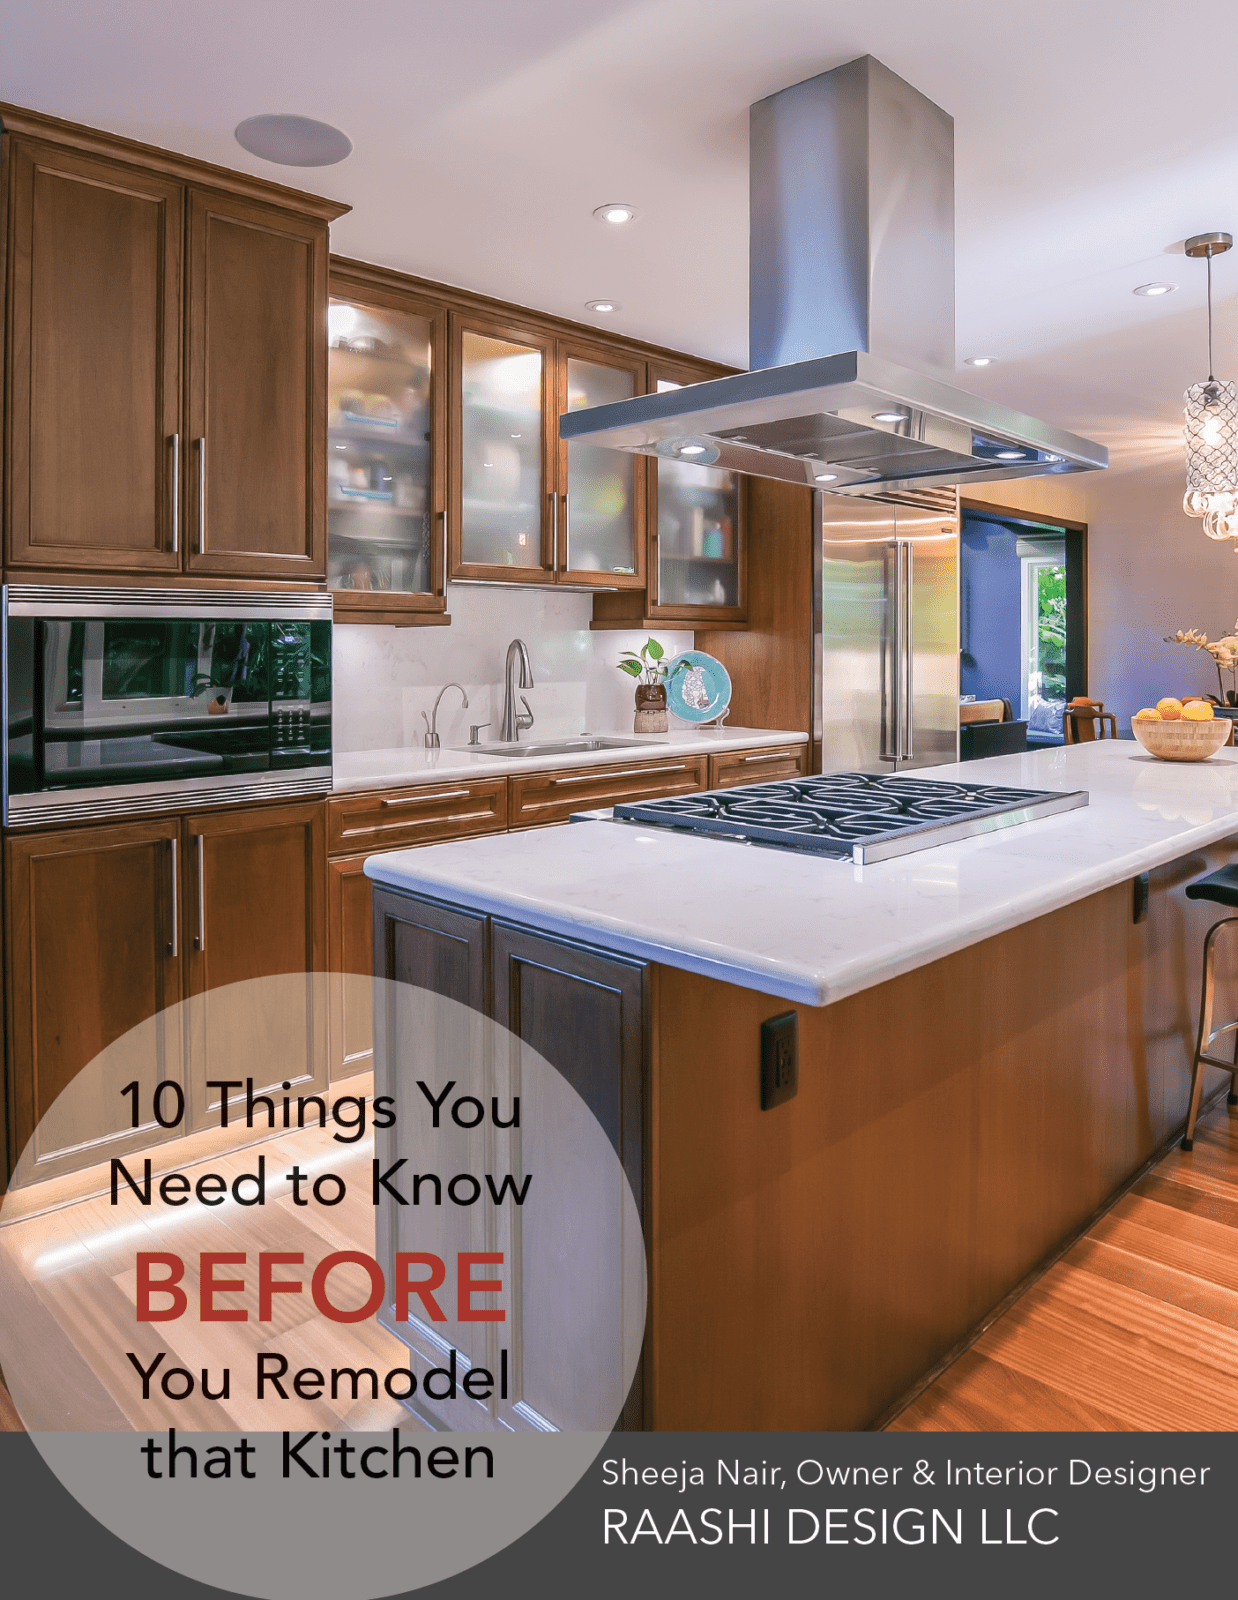 Raashi Design Kitchen Remodel Guide, Before You Remodel Your Kitchen